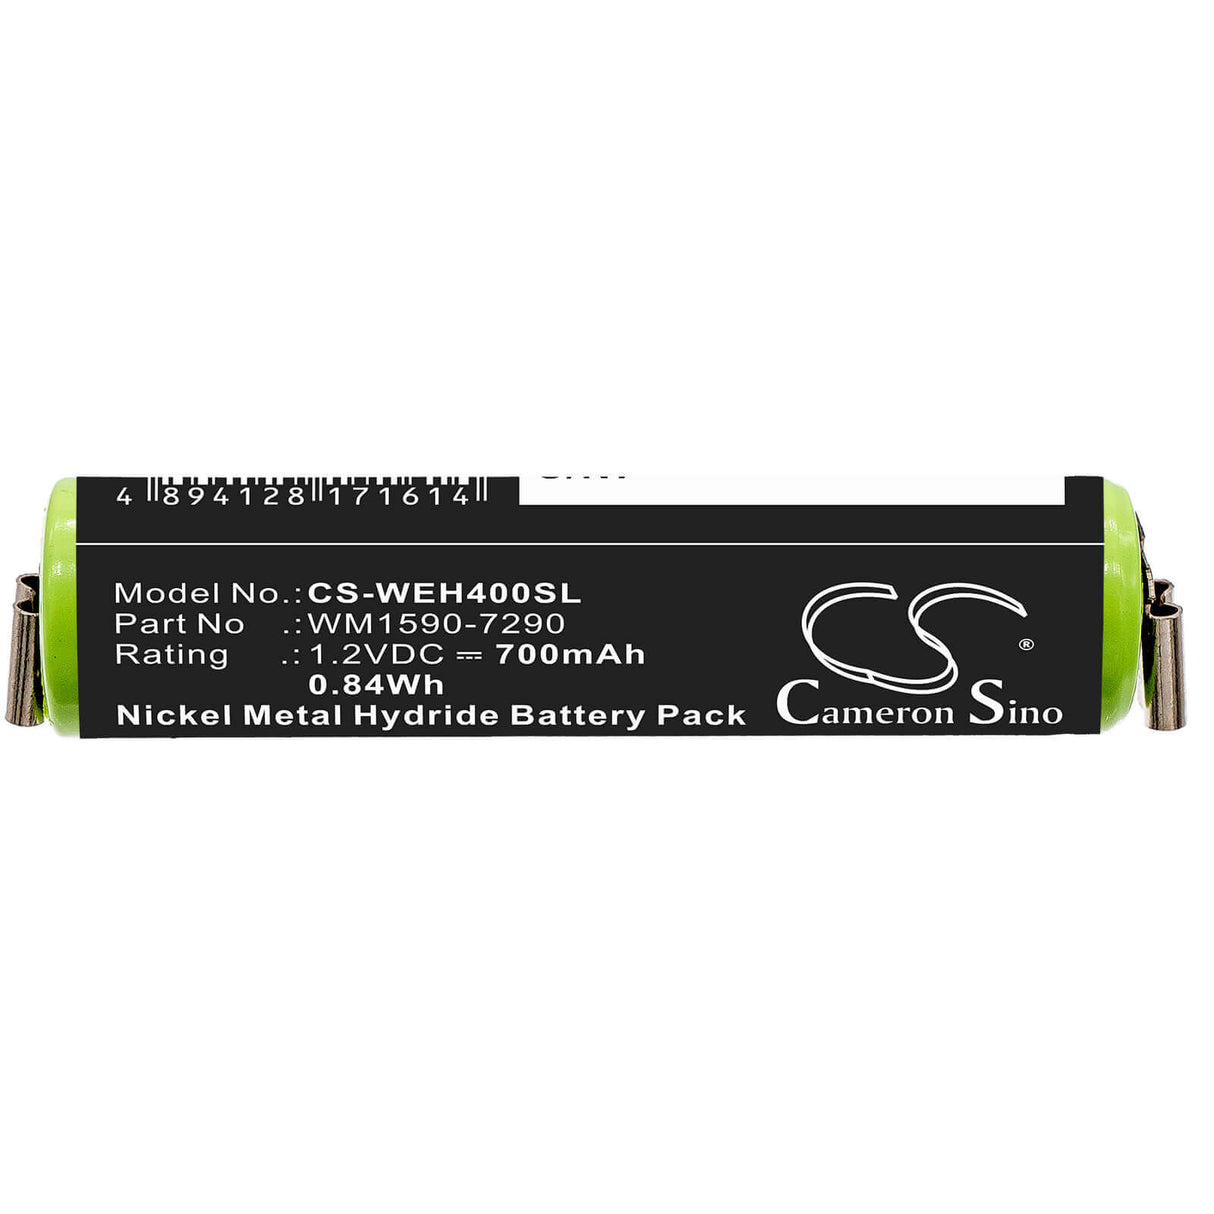 1.2v, Ni-mh, 700mah, Battery Fit's Wella, Bella, Chromini, Contura Hs40, 0.84wh Batteries for Electronics Cameron Sino Technology Limited   